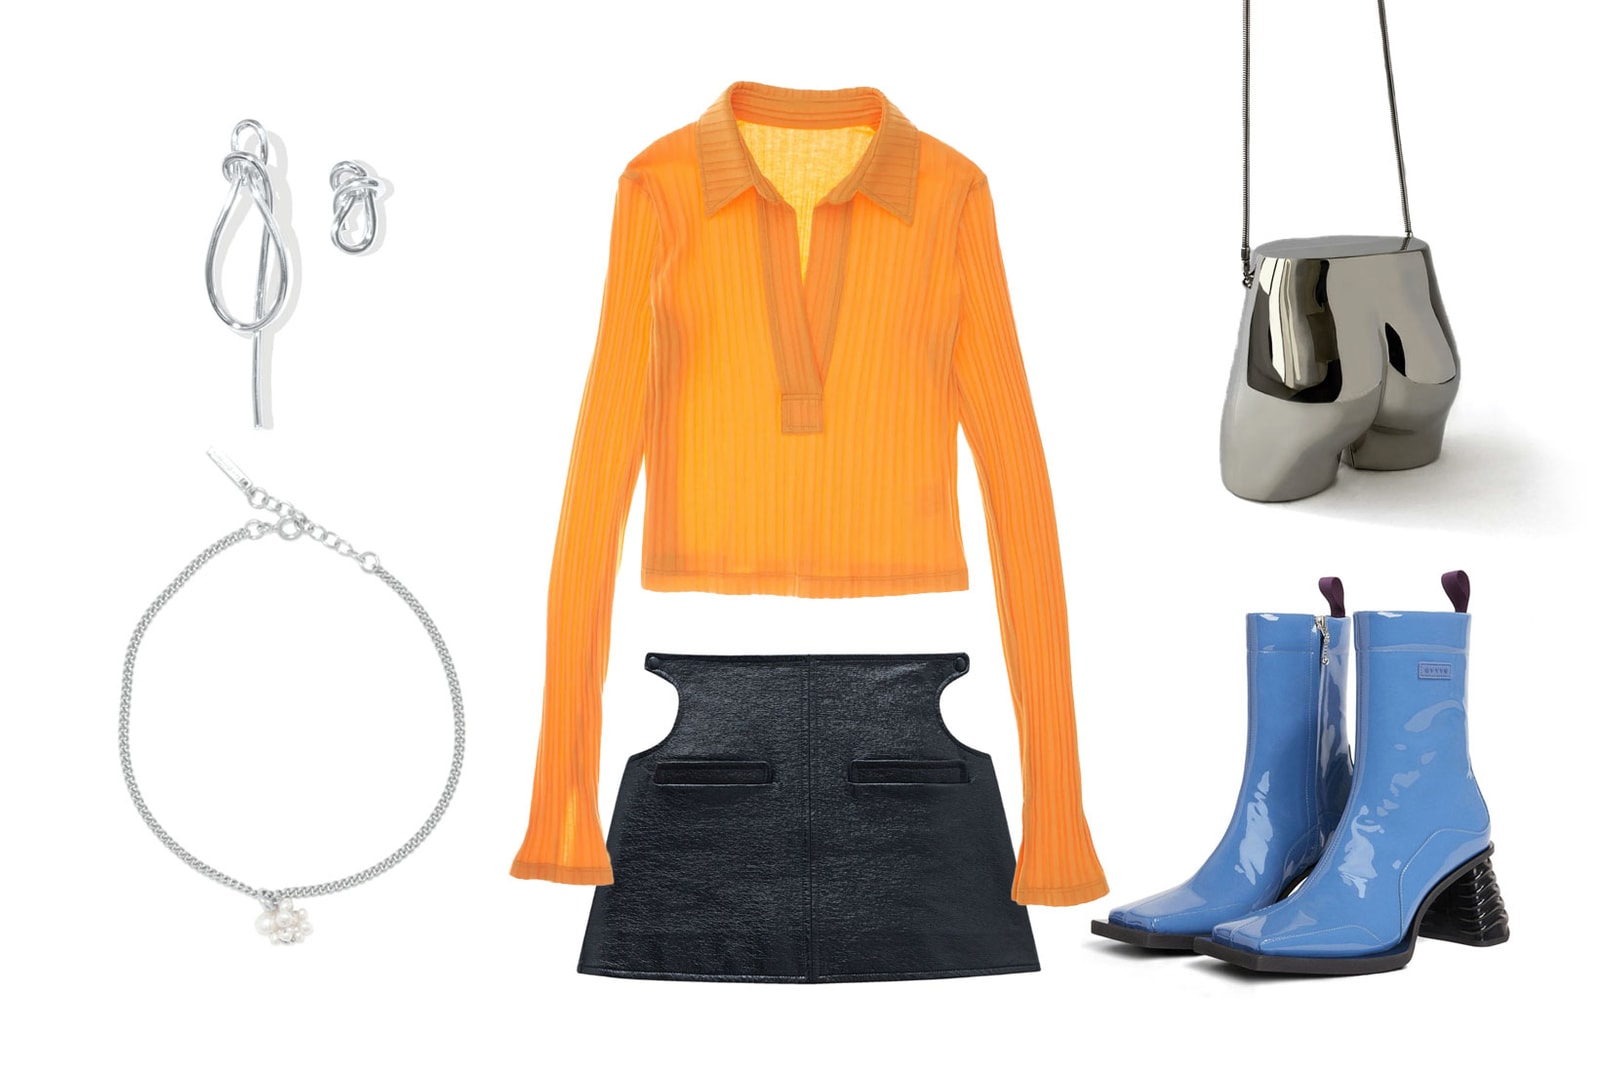 Y2K 2000s Fashion Trend Outfits Ideas Editors' Style Guide Miu Miu Courreges Miaou 